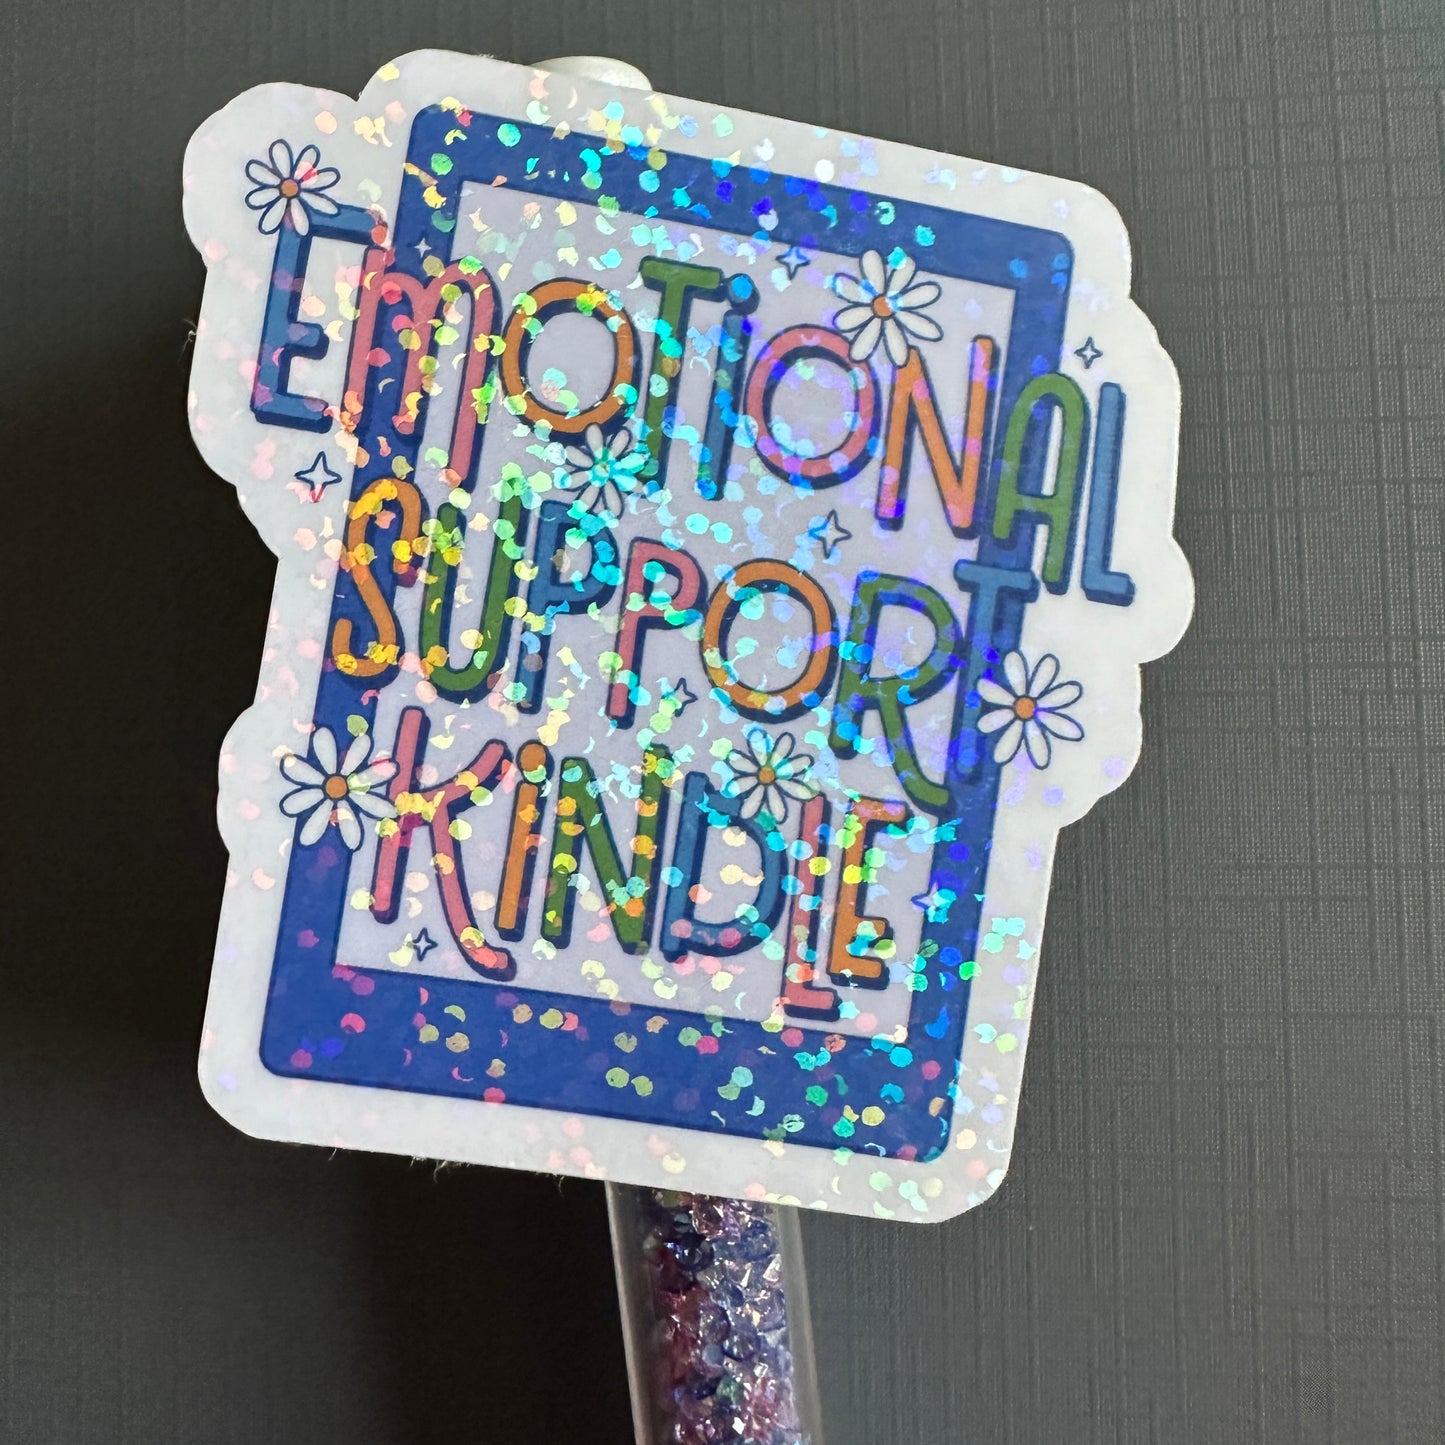 Emotional Support Kindle - Holo Overlay Sticker